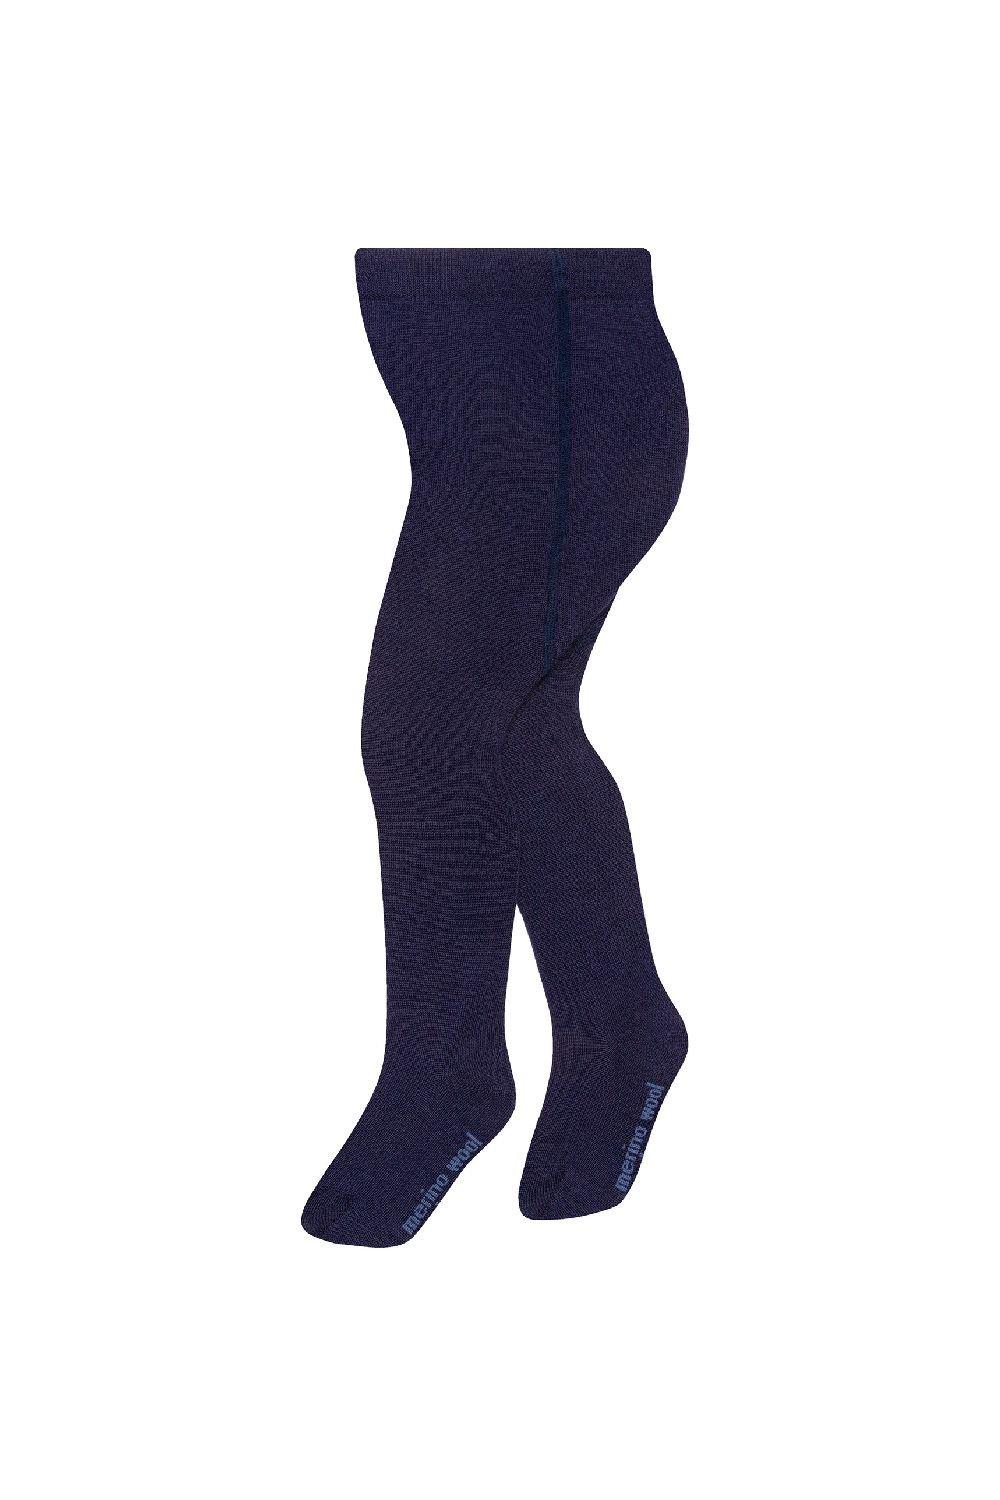 1 Pair Merino Wool Ribbed Design Cosy Warm Tights for Winter